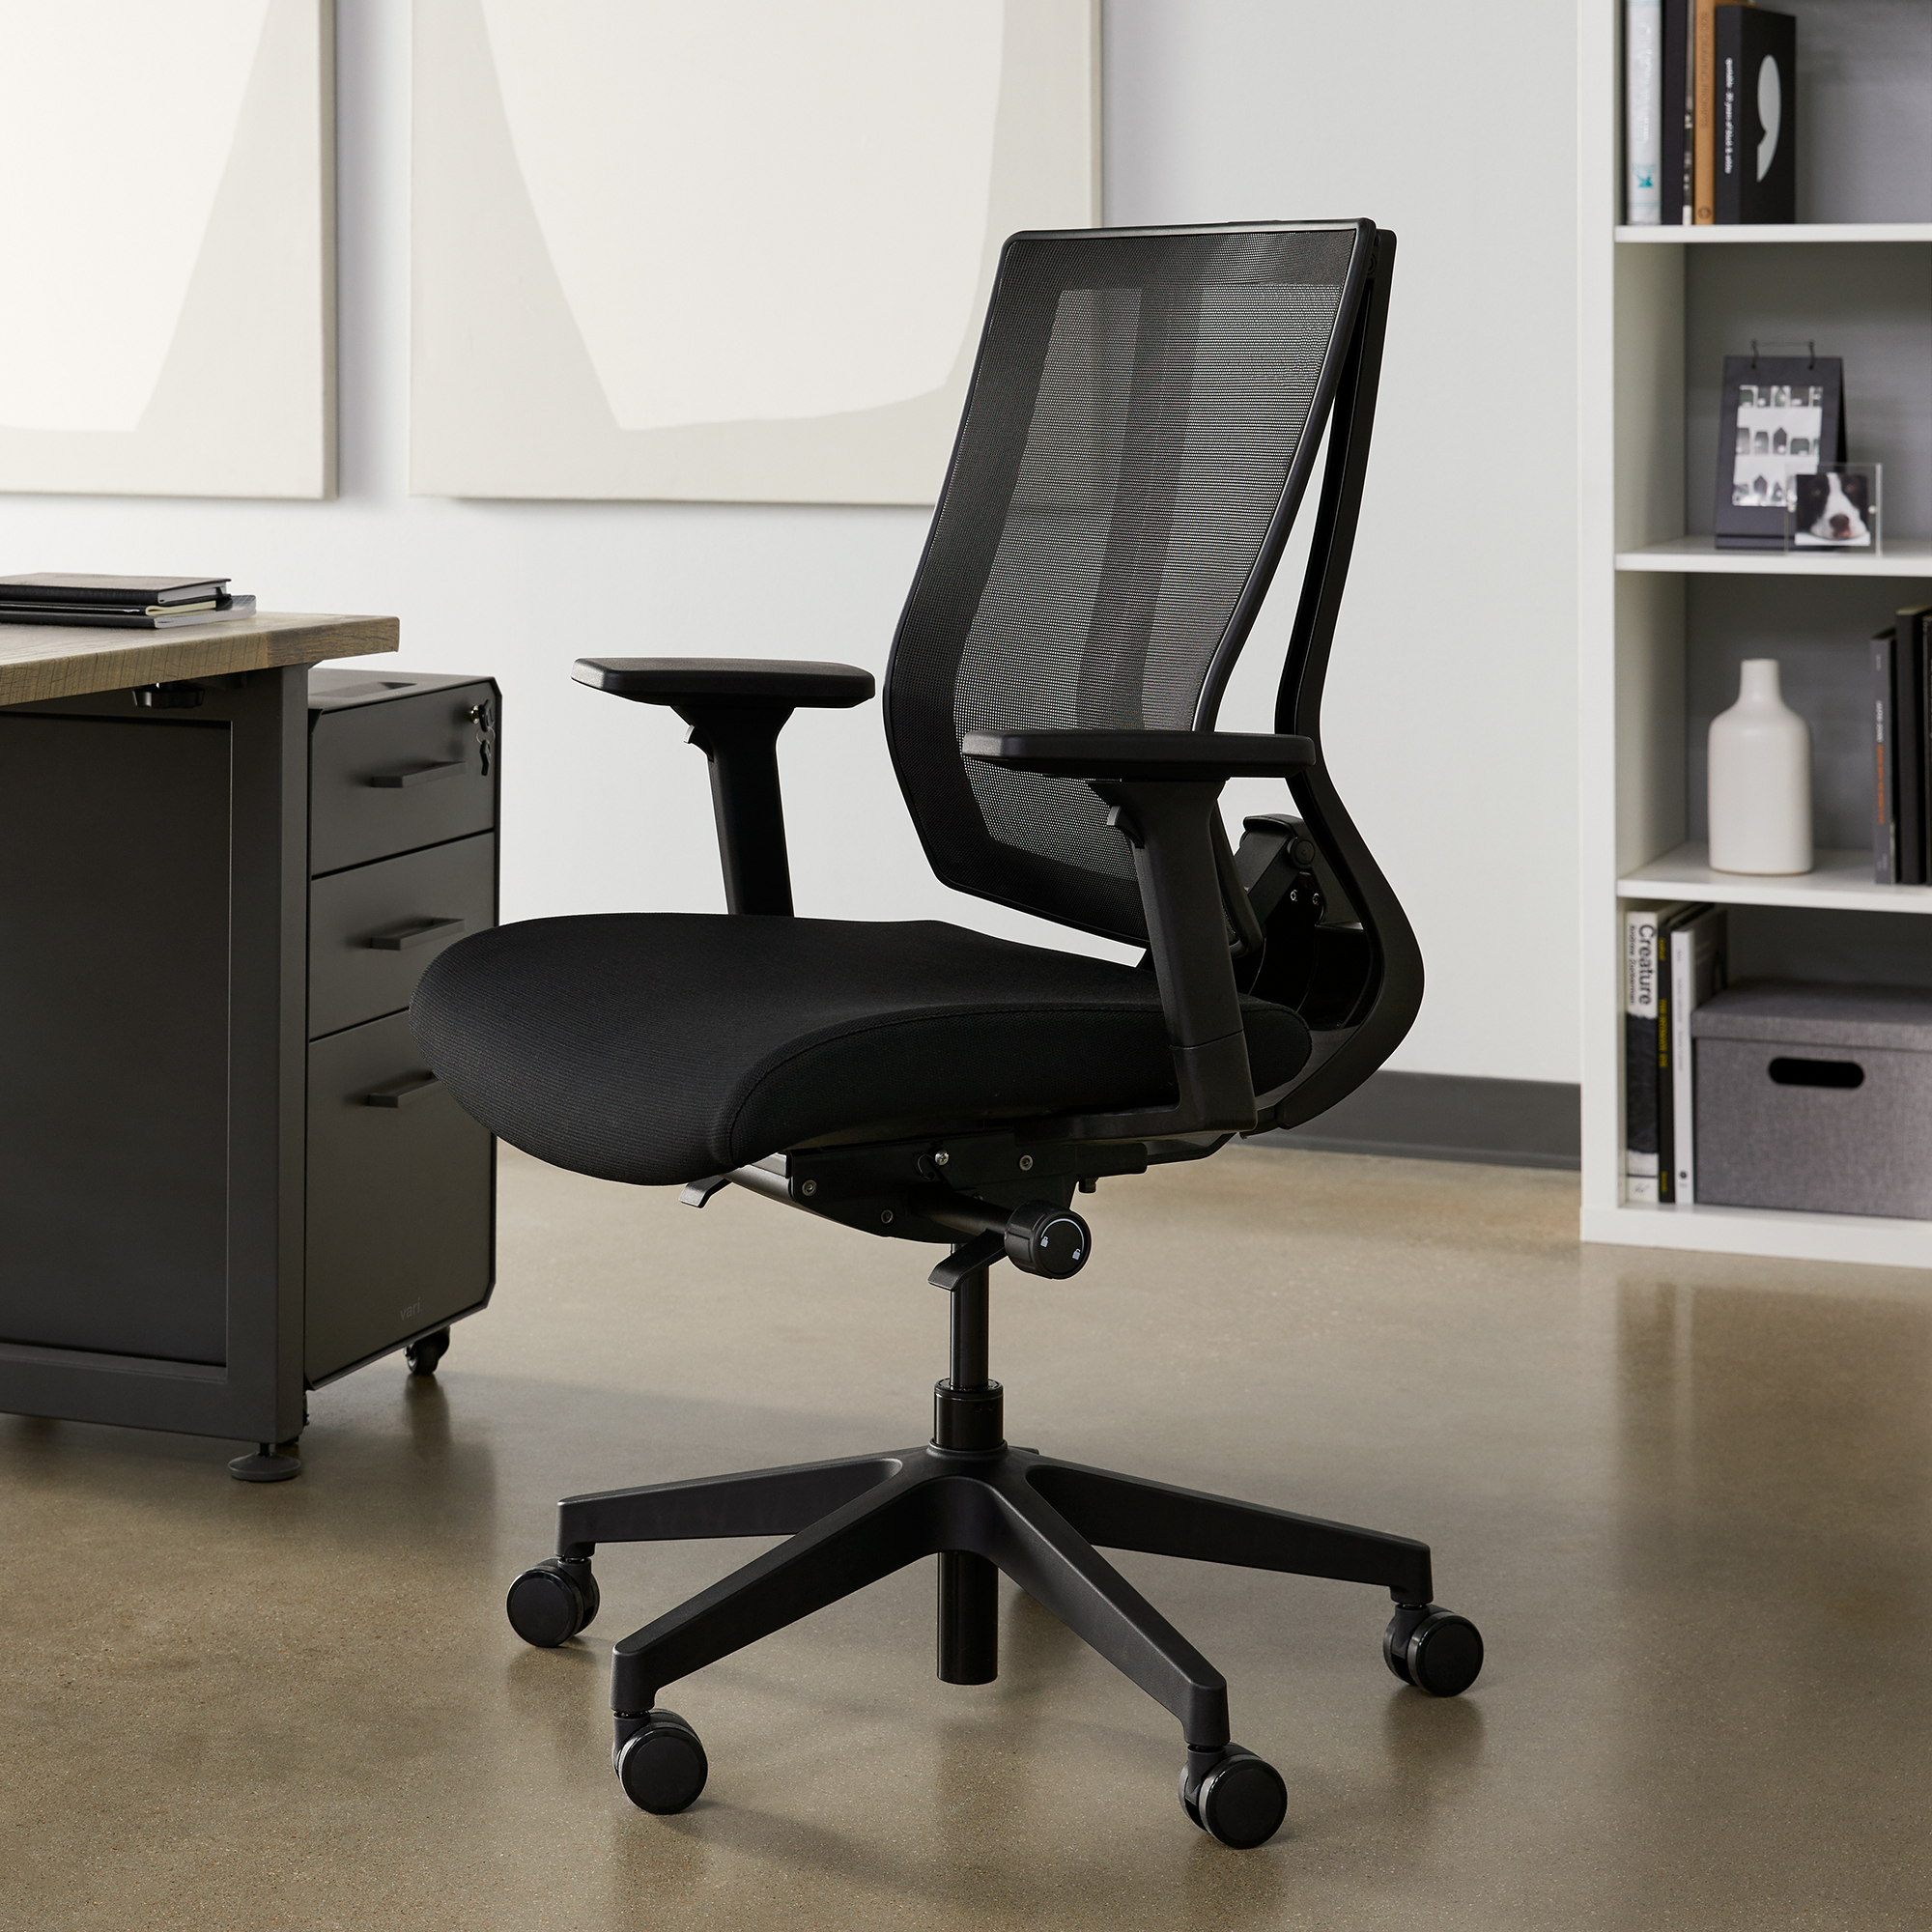 10 Reasons Why Ergonomic Chairs Are So Important In The Office